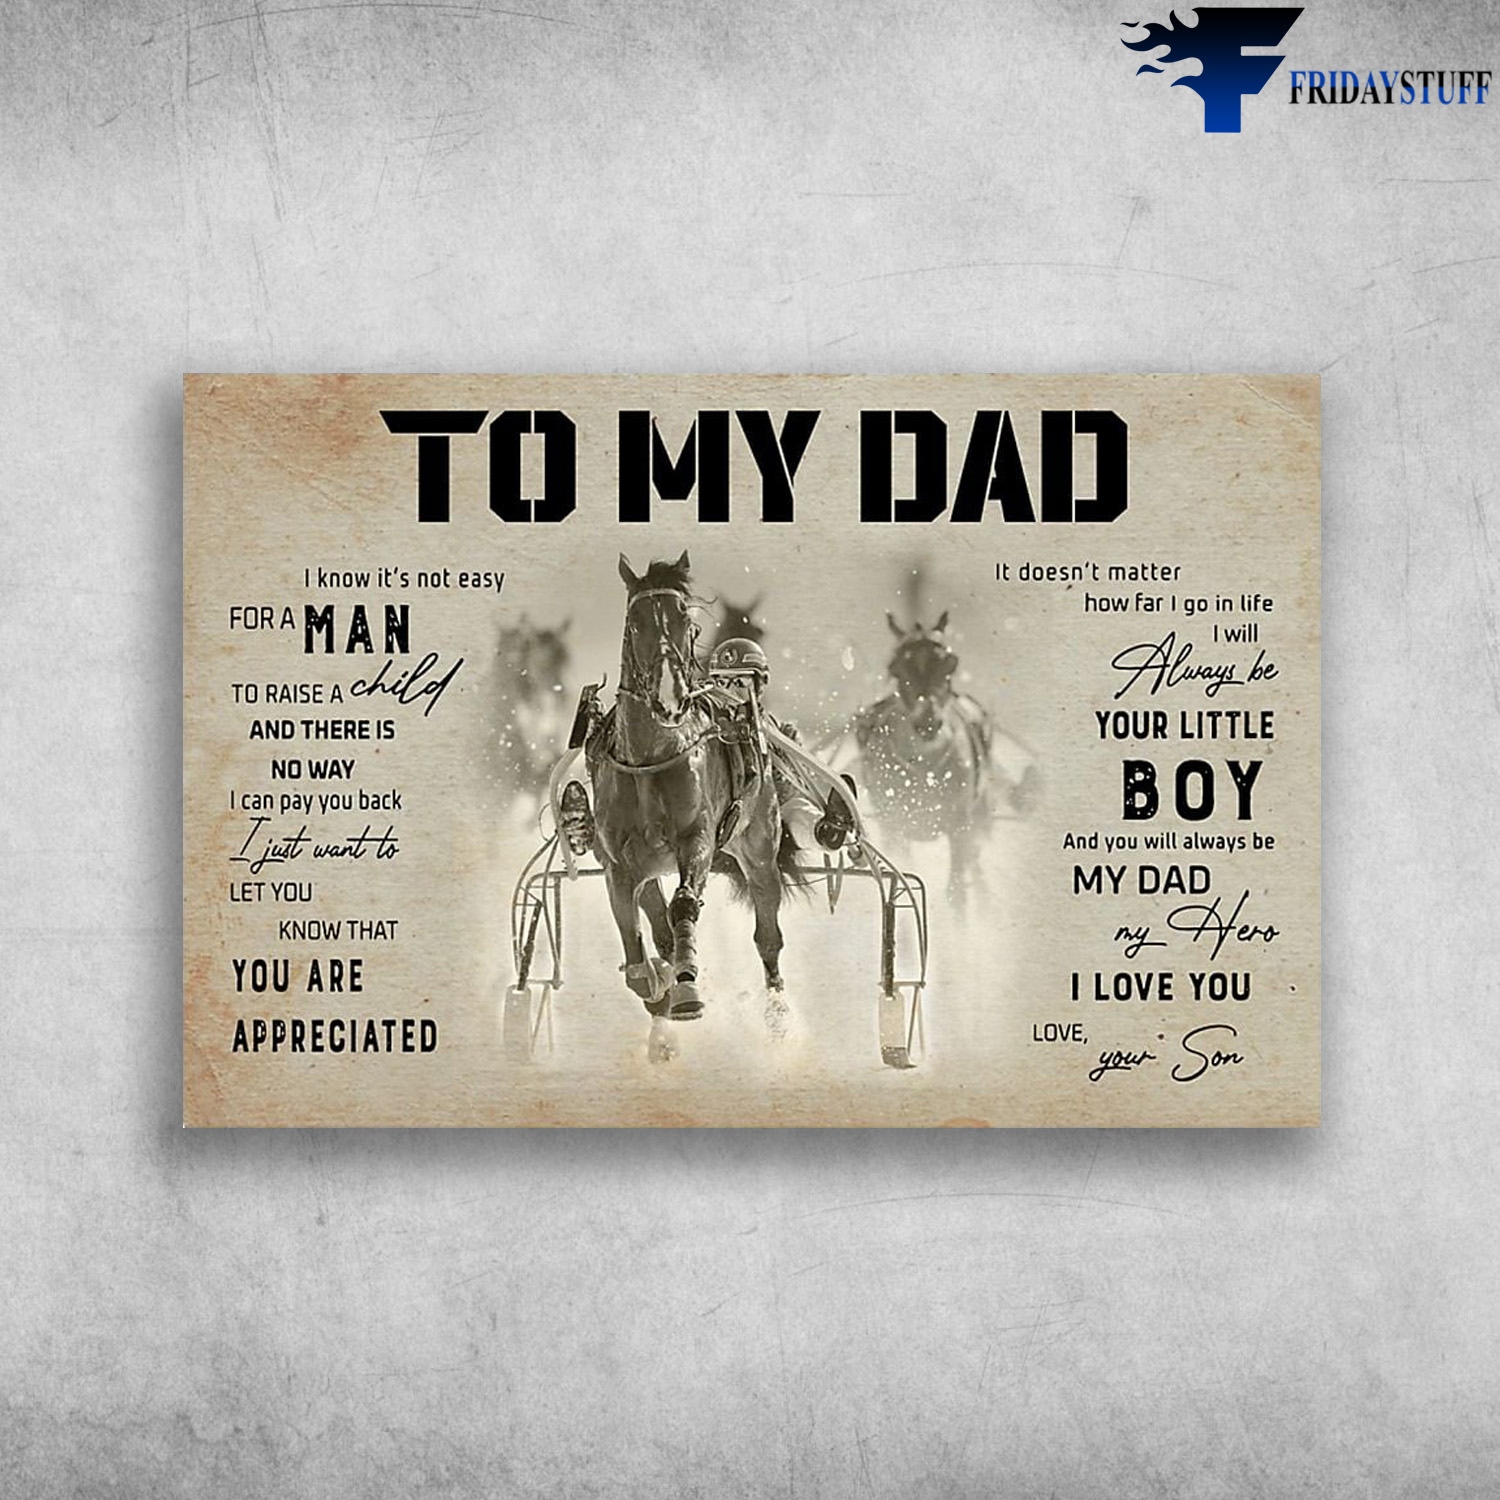 Dad Riding Horse – To My Dad, I Know It’s Not Easy For A Man, To Raise A Child, And There Is No Way, I Can Pay You Back, I Just Want To Let You Know That, You Are Appreciated, I Doesn’t Matter How Far I Go In Life